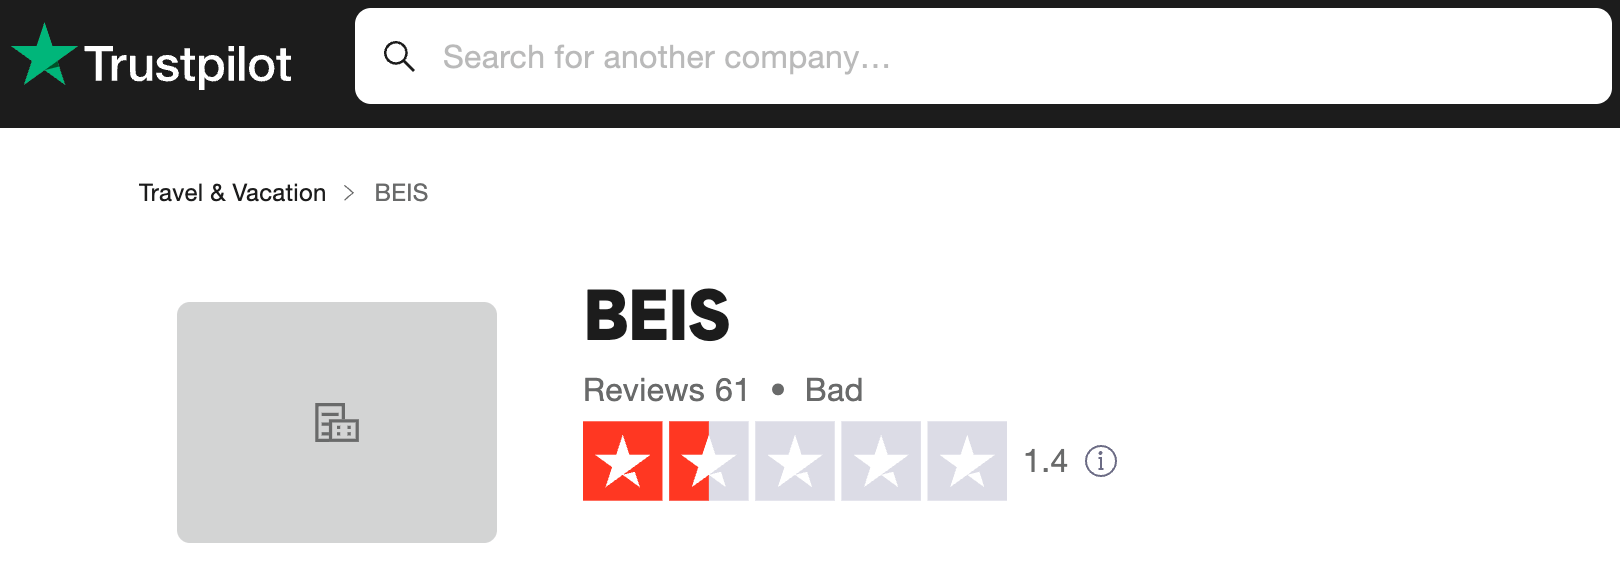 beis brand trustpilot review website black and white trustpilot green star 1.4 stars out of 5 bad rating BEIS brand name